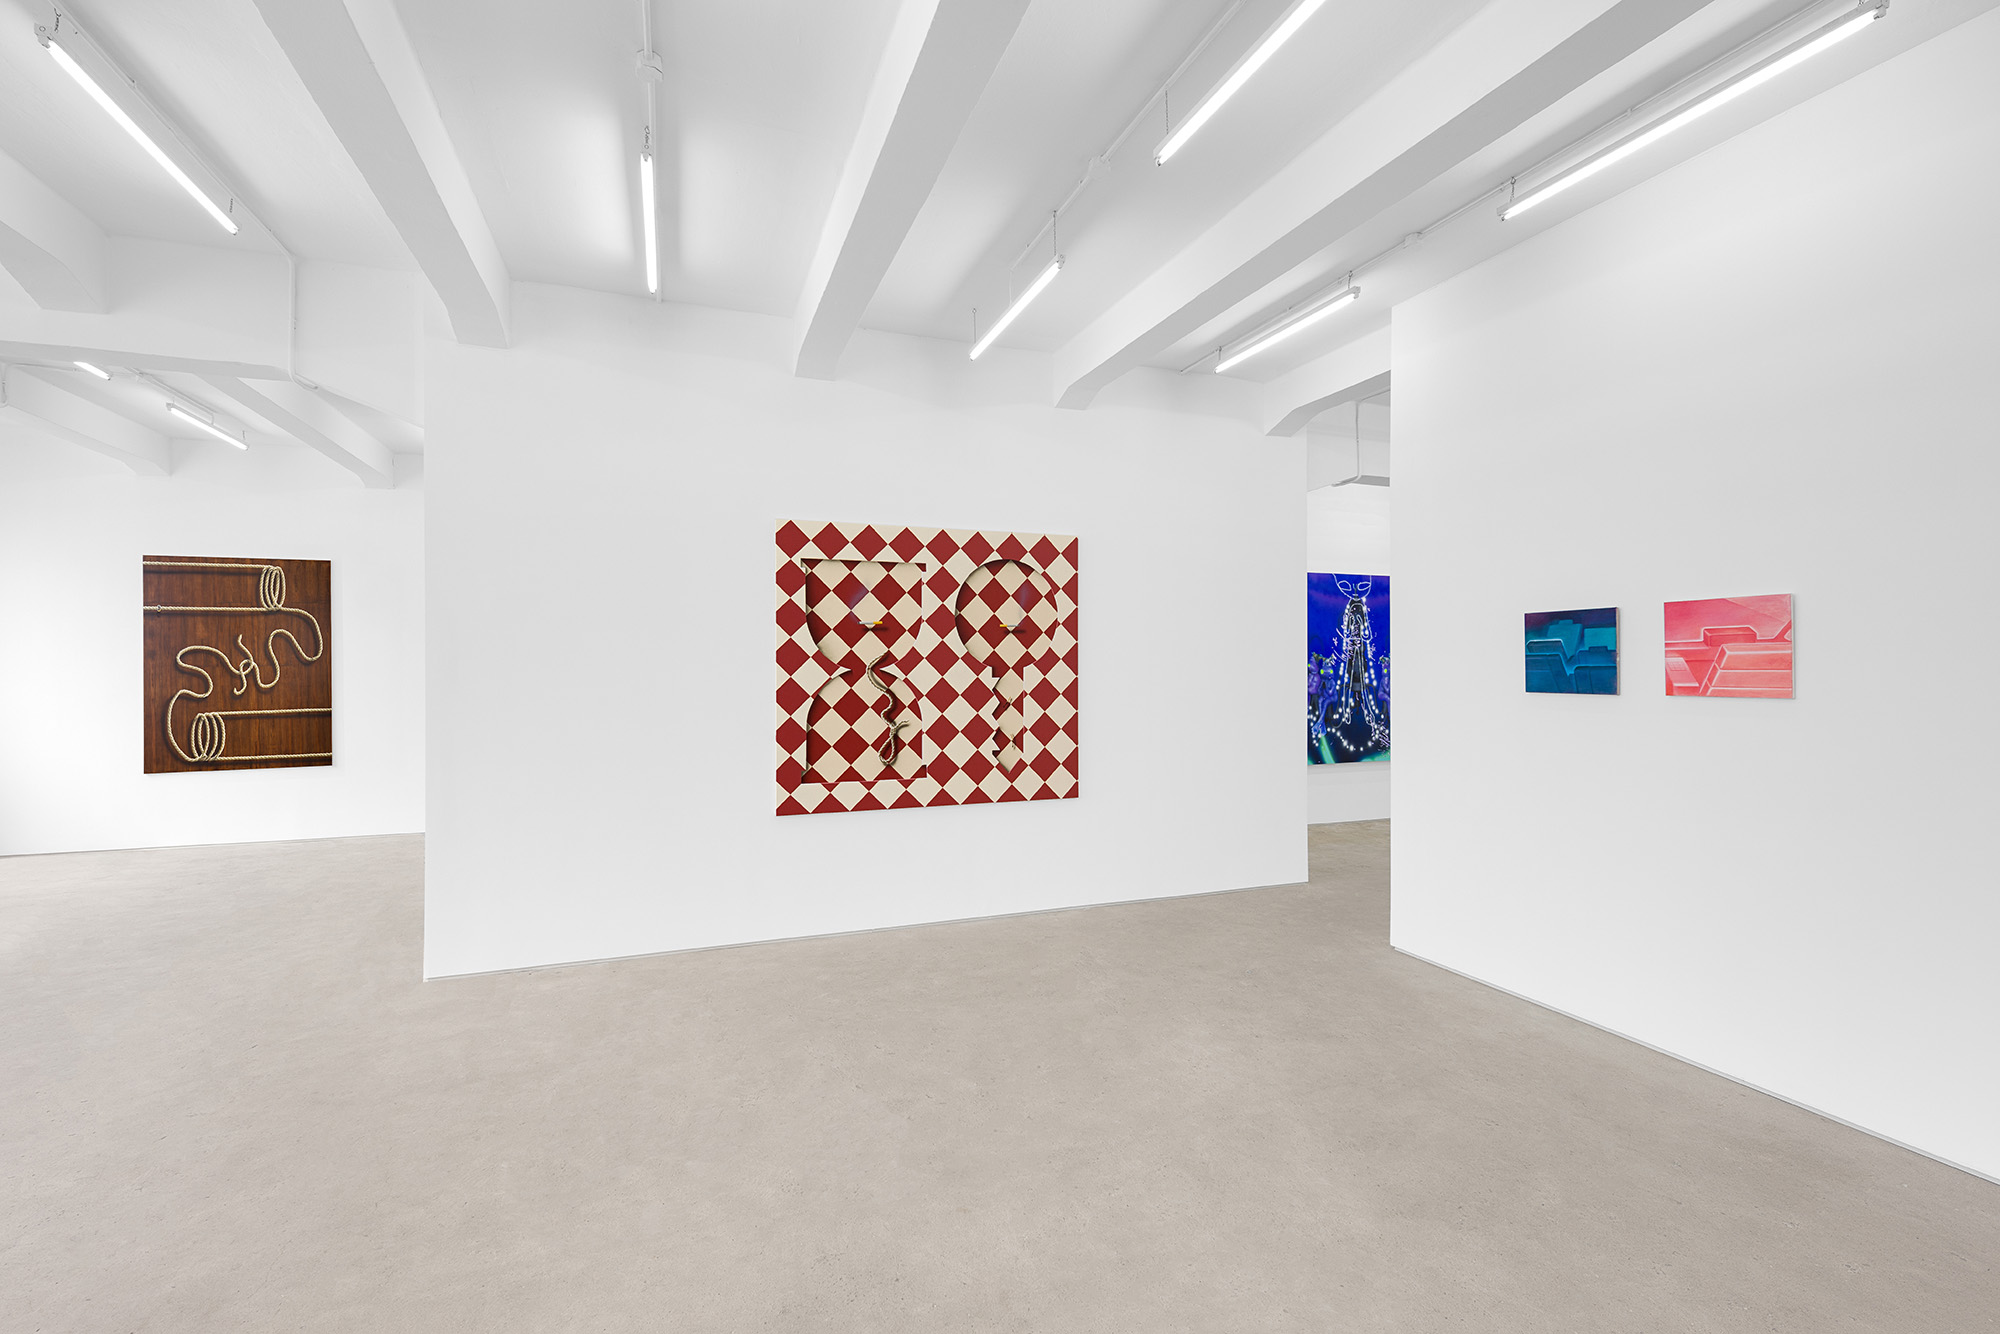 Installation view of group exhibition, Vacation II, at Gallery Vacancy, featuring works by Charline Tyberghein, Rao Weiyi, and Richard Burton.